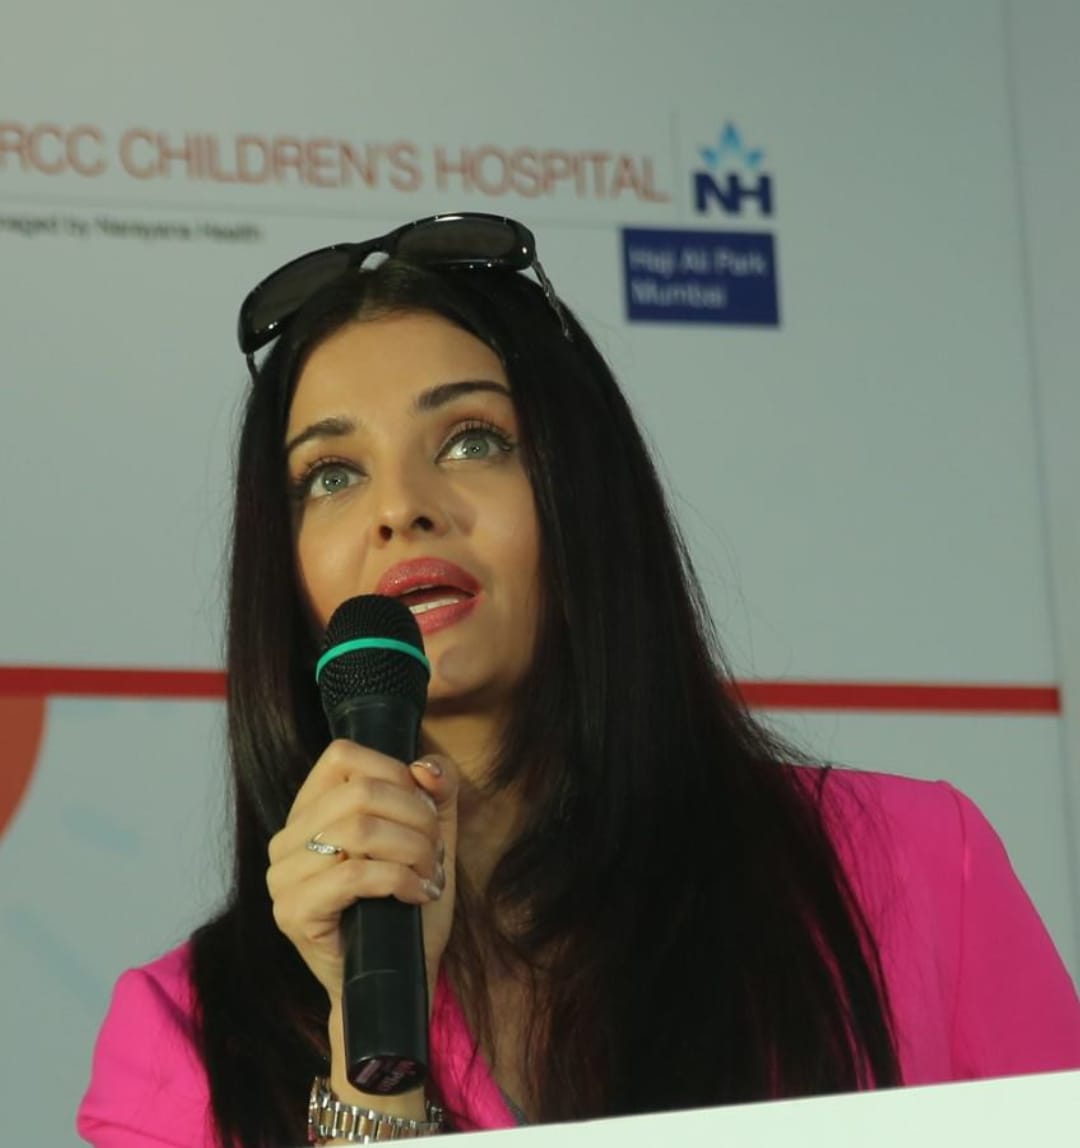 Bollywood diva and former Miss World Aishwarya Rai Bachchan addressing the gathering at Narayana Health SRCC Children’s Hospital at Haji Ali, Worli in Mumbai today. Aishwarya Rai Bachchan, Smt Vrinda Rai and Aaradhya Bachchan celebrates ‘Day Of Smiles’ with Smile Train India and spent time with cleft patients and their families on the occasion of her Late father’s Birthday -Photo By Sachin Murdeshwar GPN